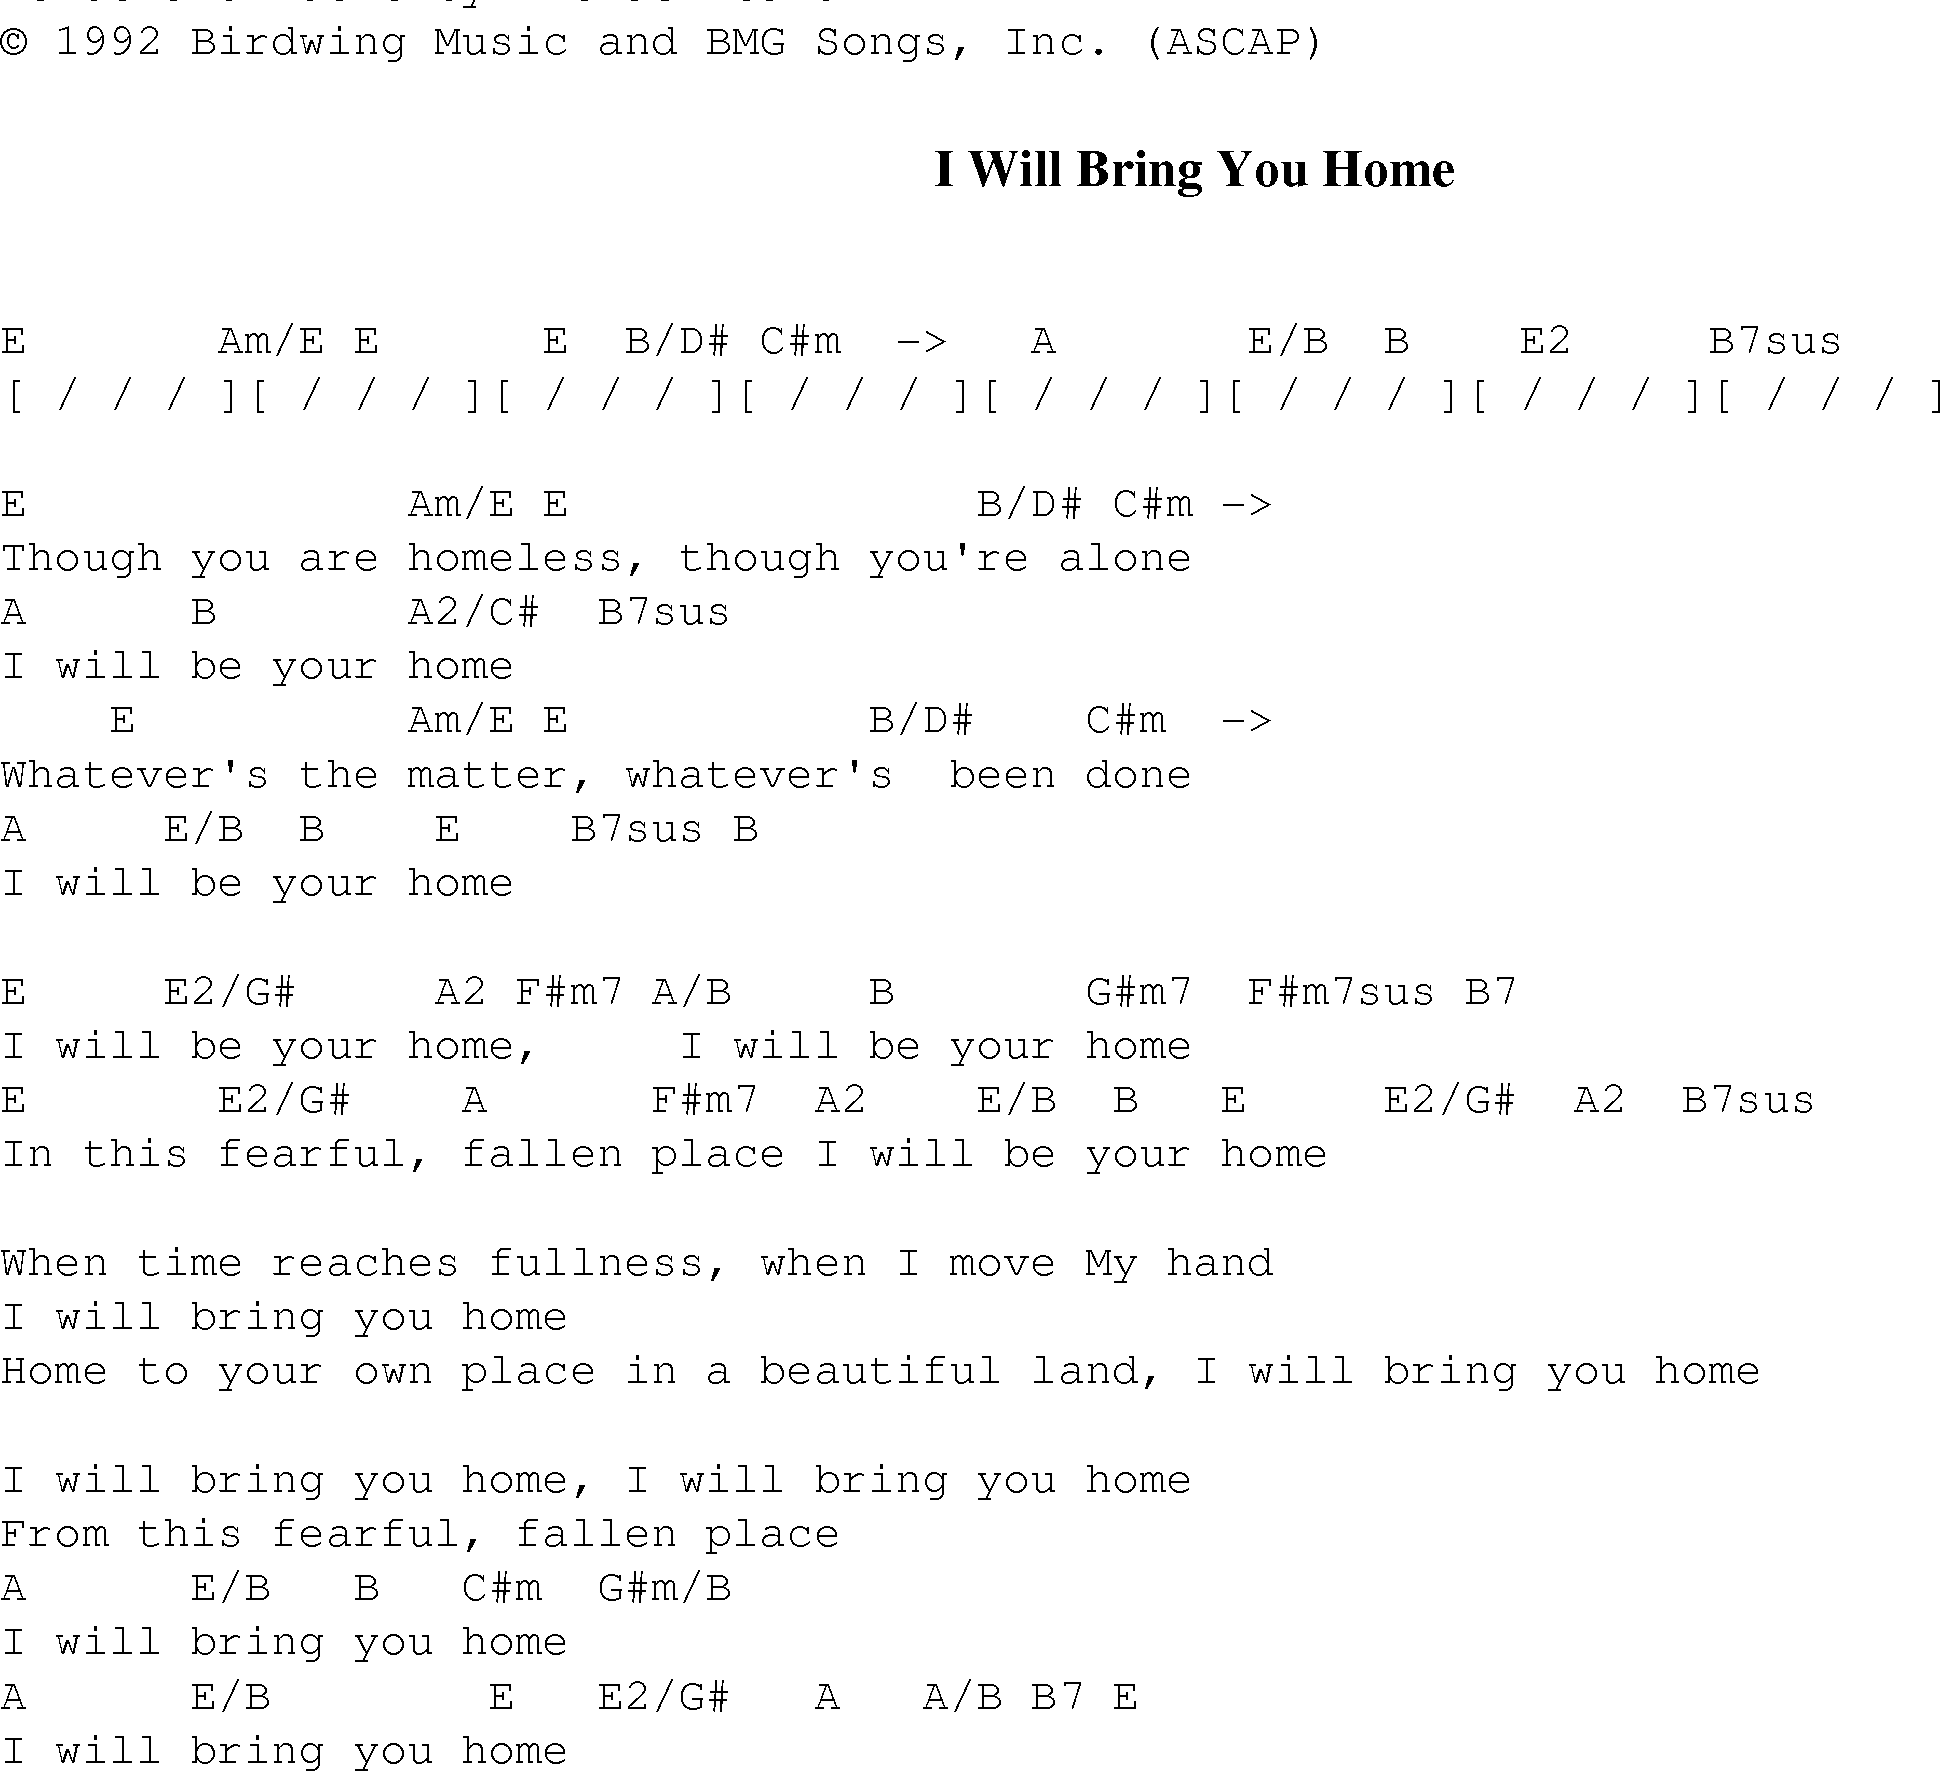 Gospel Song: i_will_bring_you_home, lyrics and chords.